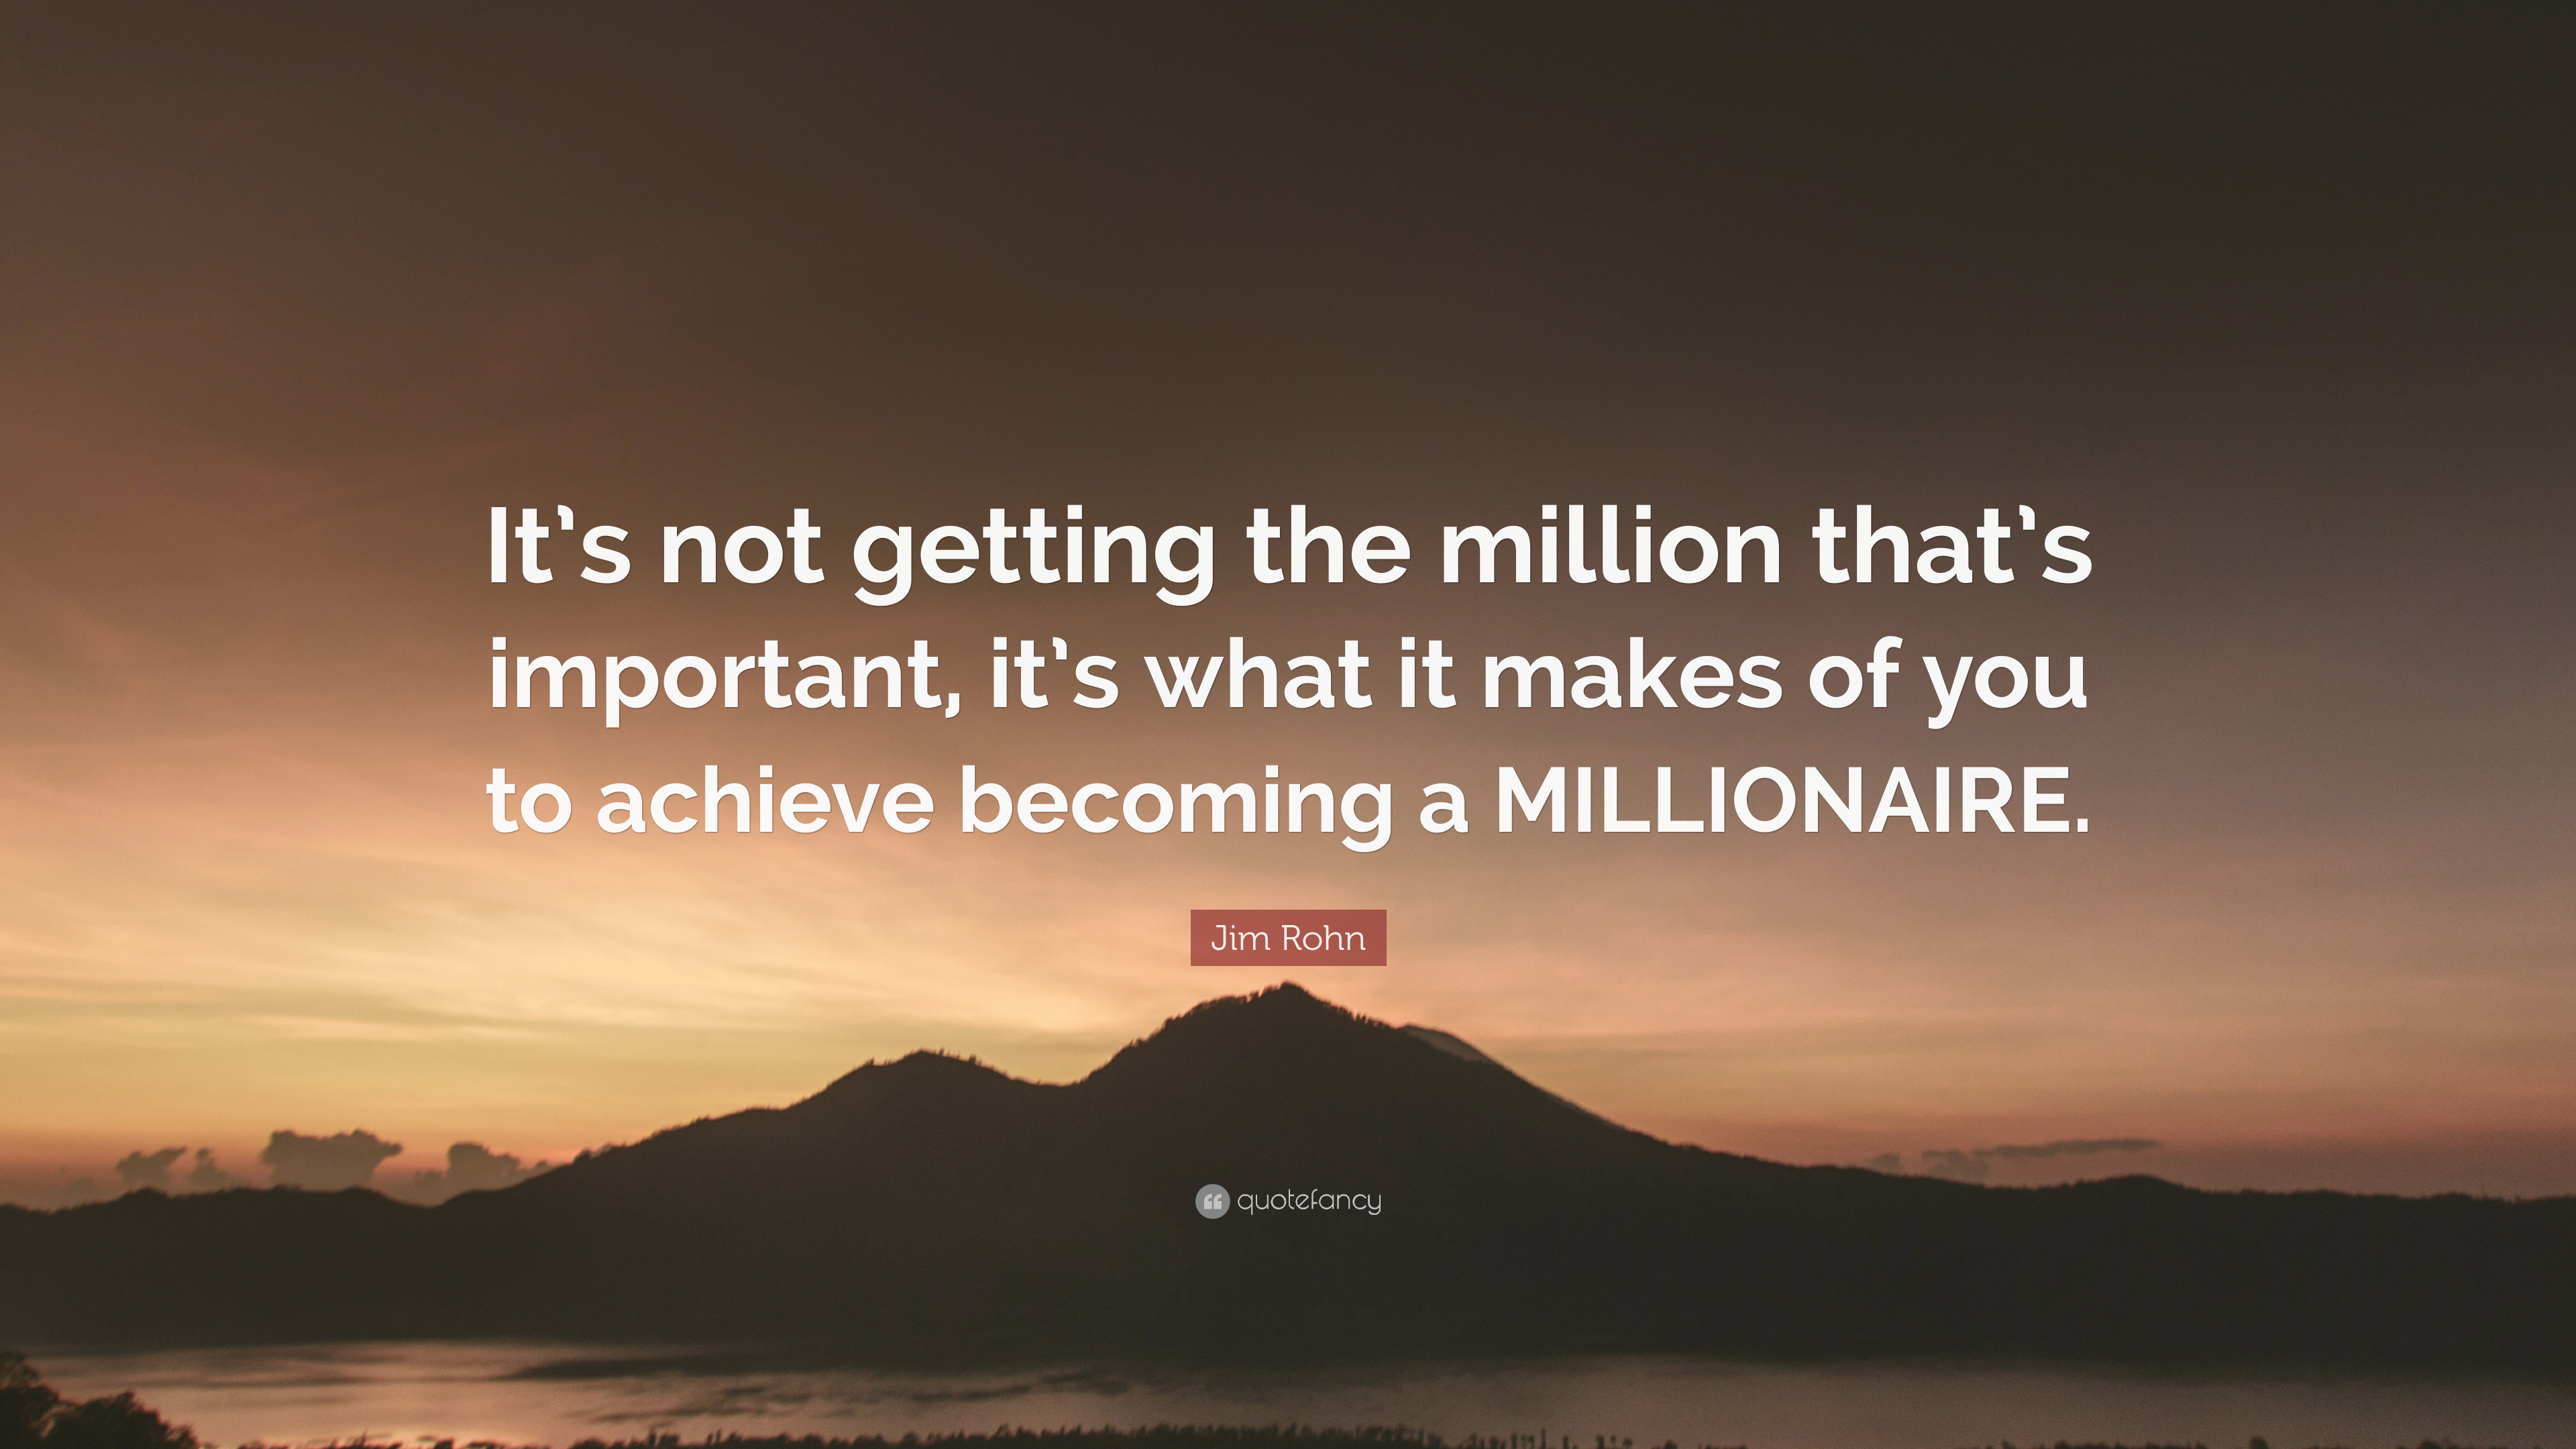 3840x2160 Jim Rohn Quote: “It's not getting the million that's important, it's what it